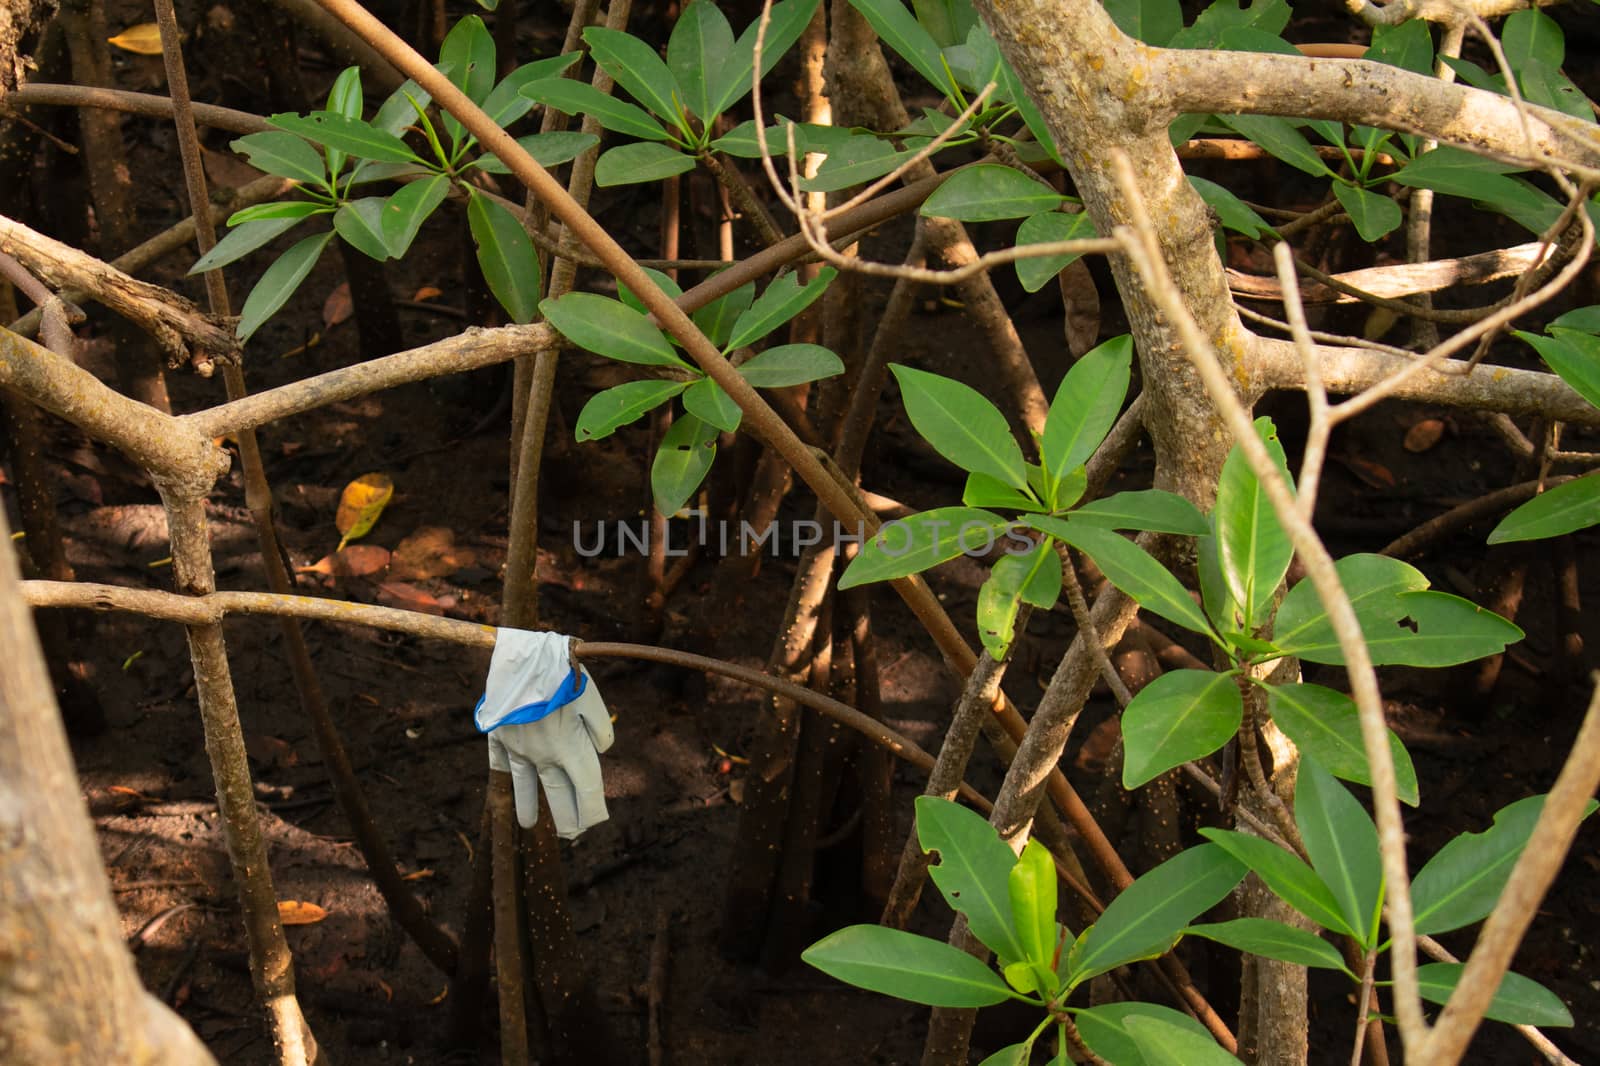 A White Glove Hanging on a Branch in a Swamp by bju12290